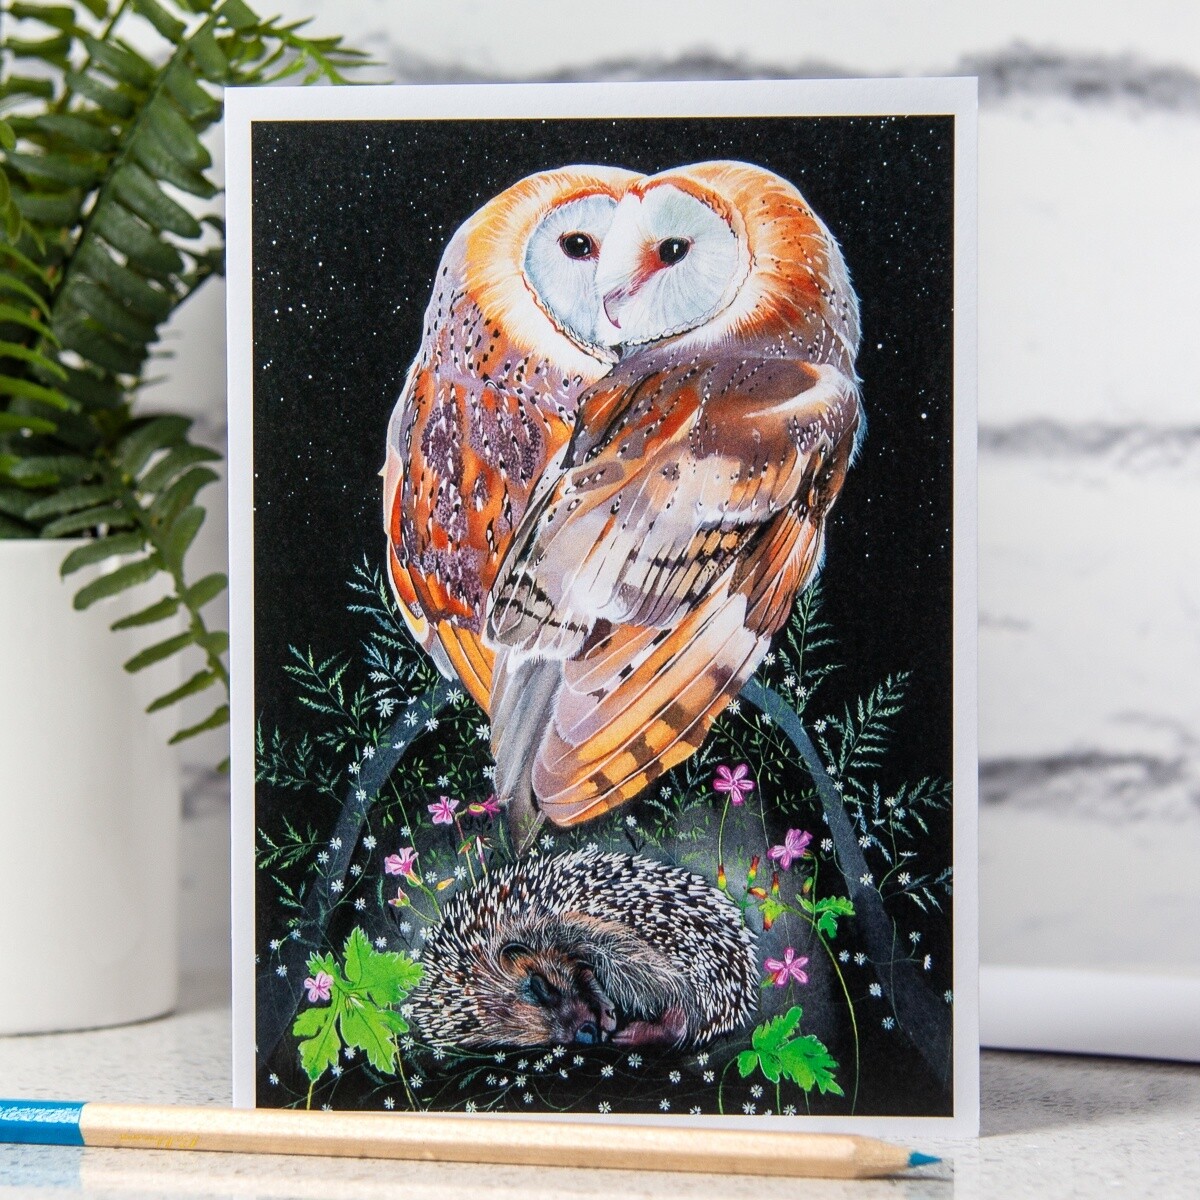 The Barn Owls and the Hedgehog Card by Sam Cannon